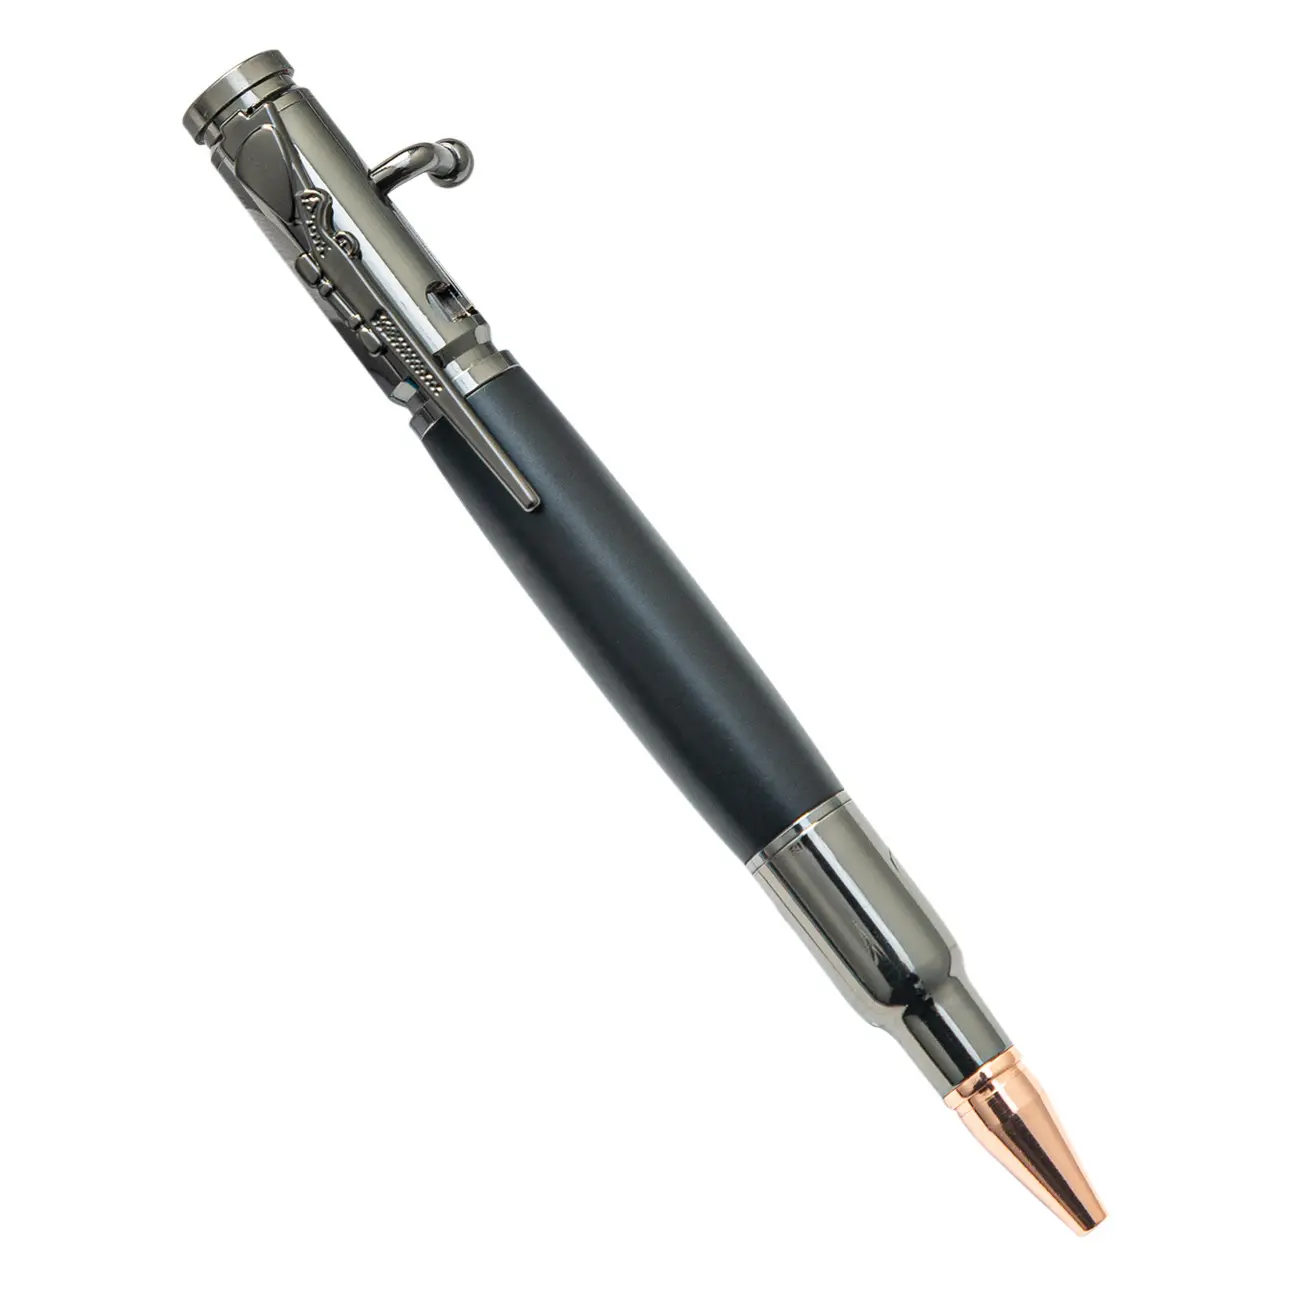 SY43 Creative New bullet shaped Bolt Action Tactical Pen Metal Luxury Gun Pen Rifle Design Clip For Business Gift